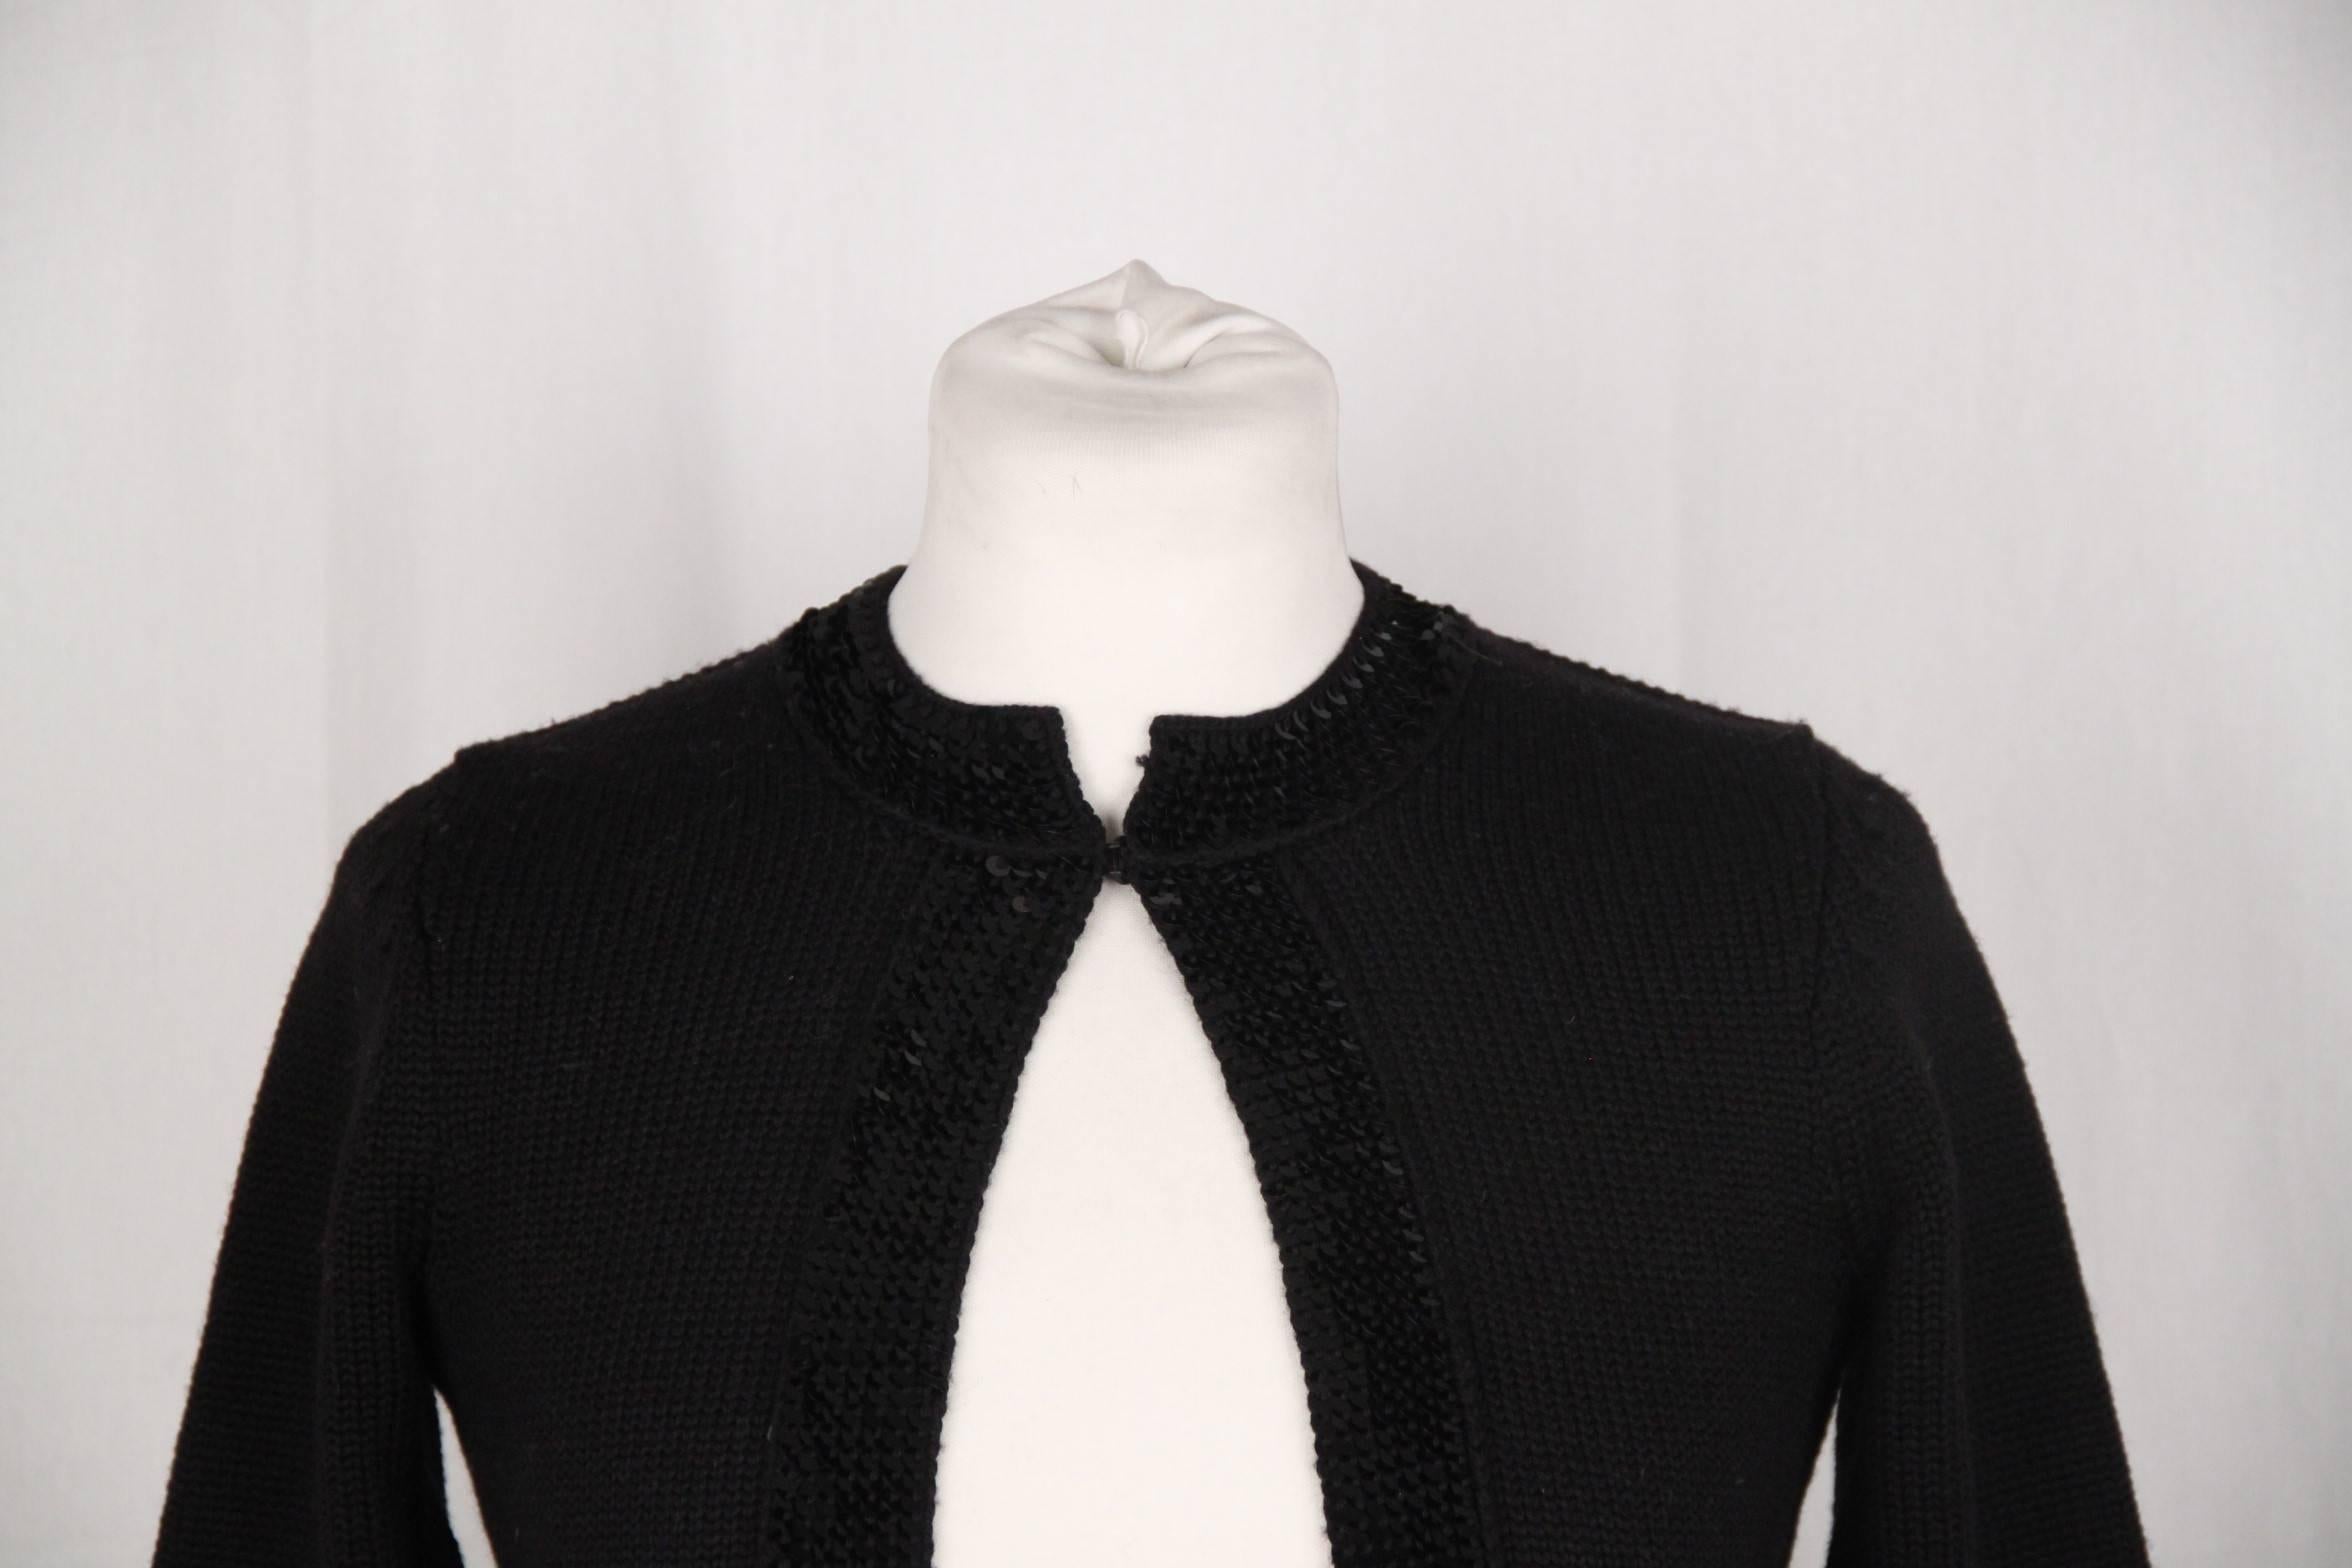 - Black Chanel open front cardigan
- Hook & Eye closure on the neckline 
- 3/4 sleeve
- Sequinned trim 
- Cropped lenght
- Size: 36 FR (The size shown for this item is the size indicated by the designer on the label). it should correspond to a